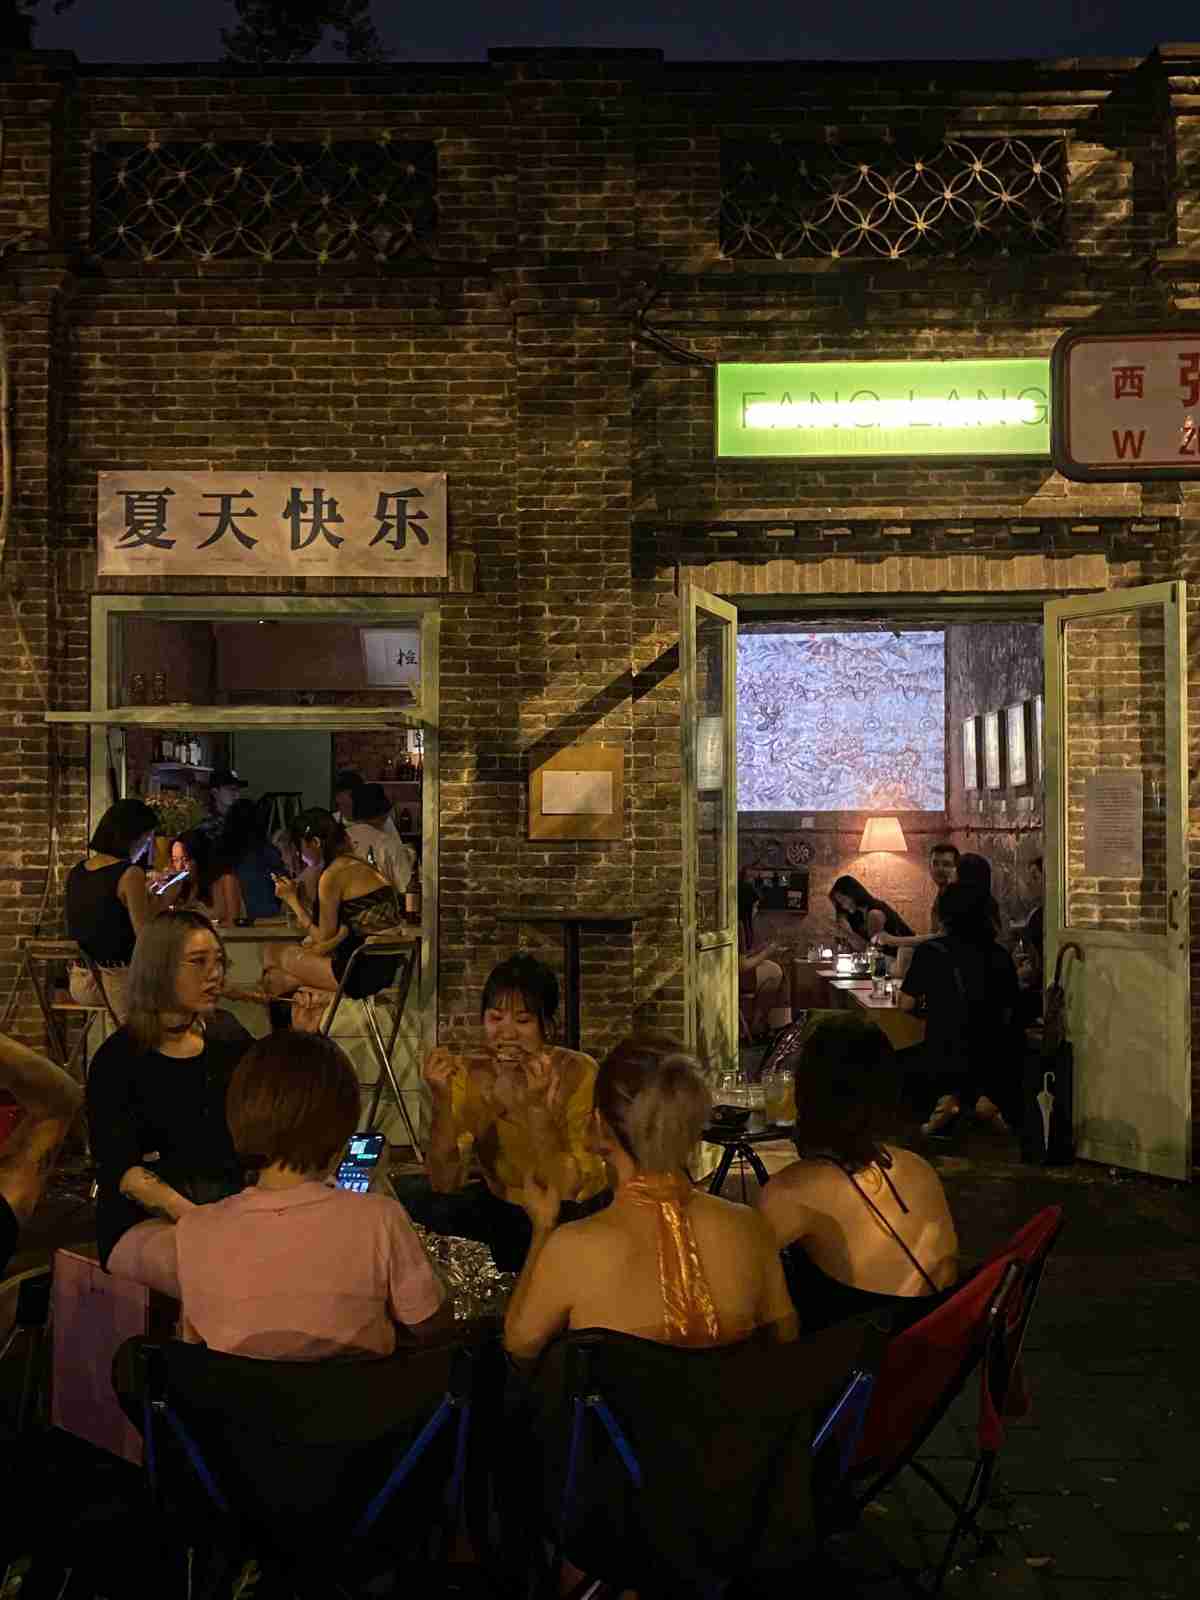 A small bar in a Beijing hutong